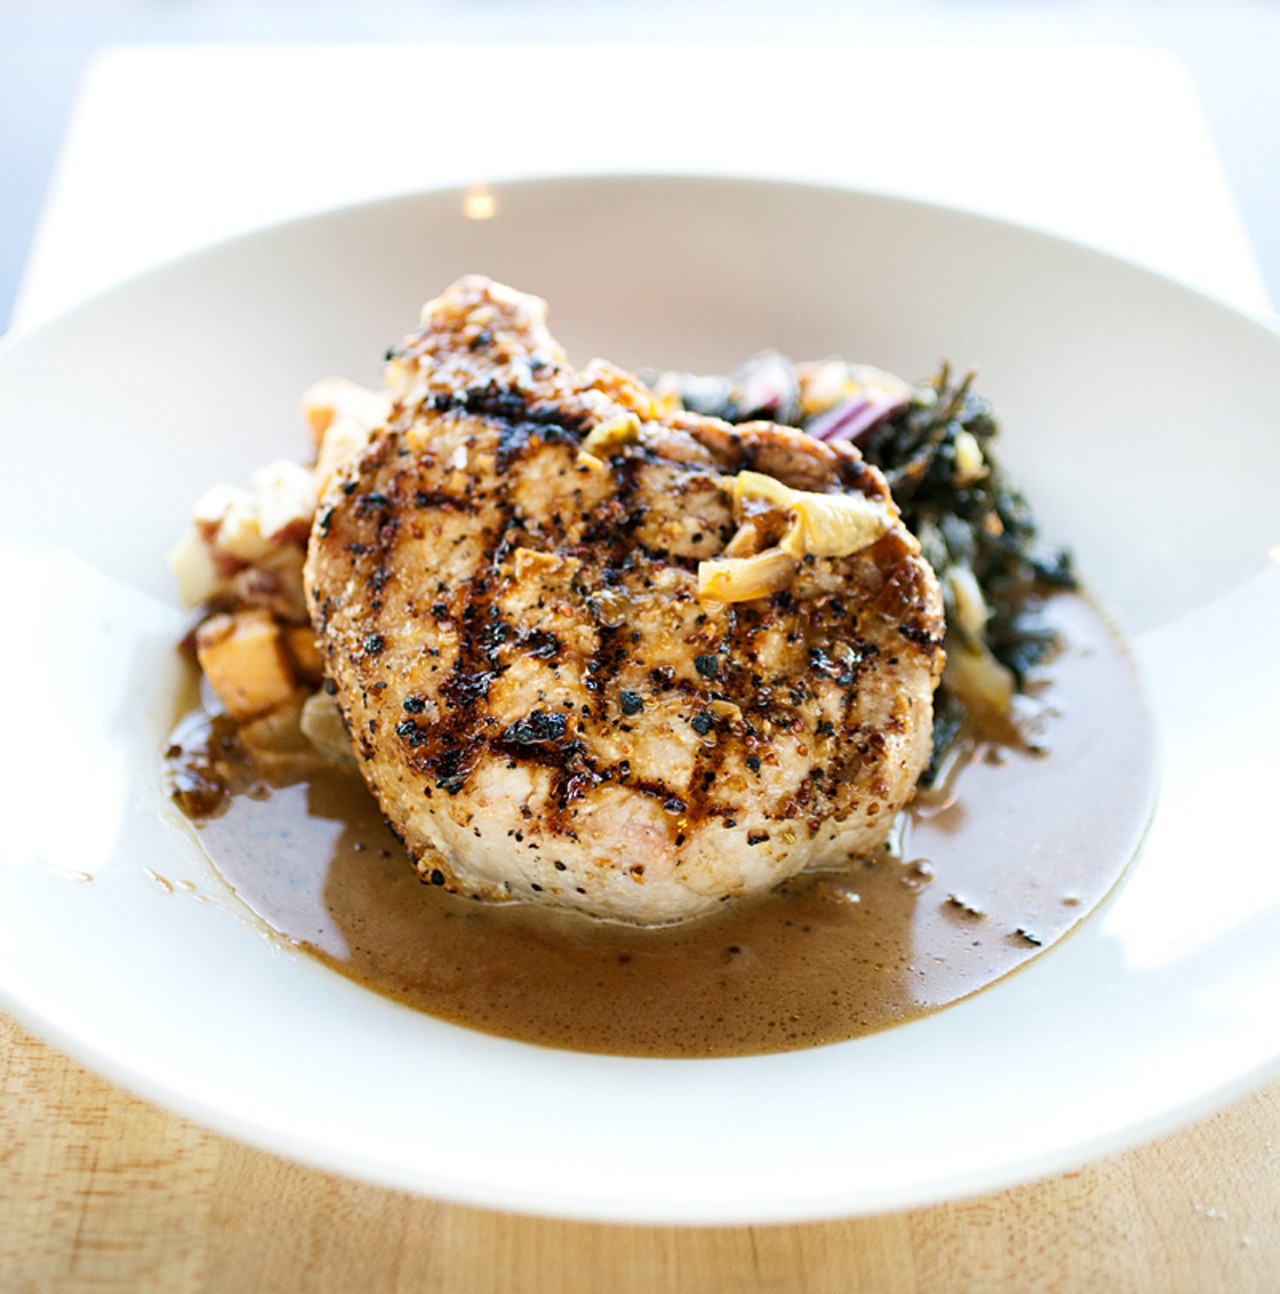 Here's Rensing's Farm pork chop with sweet-potato-and-bacon hash, braised greens and a grain-mustard pork sauce.